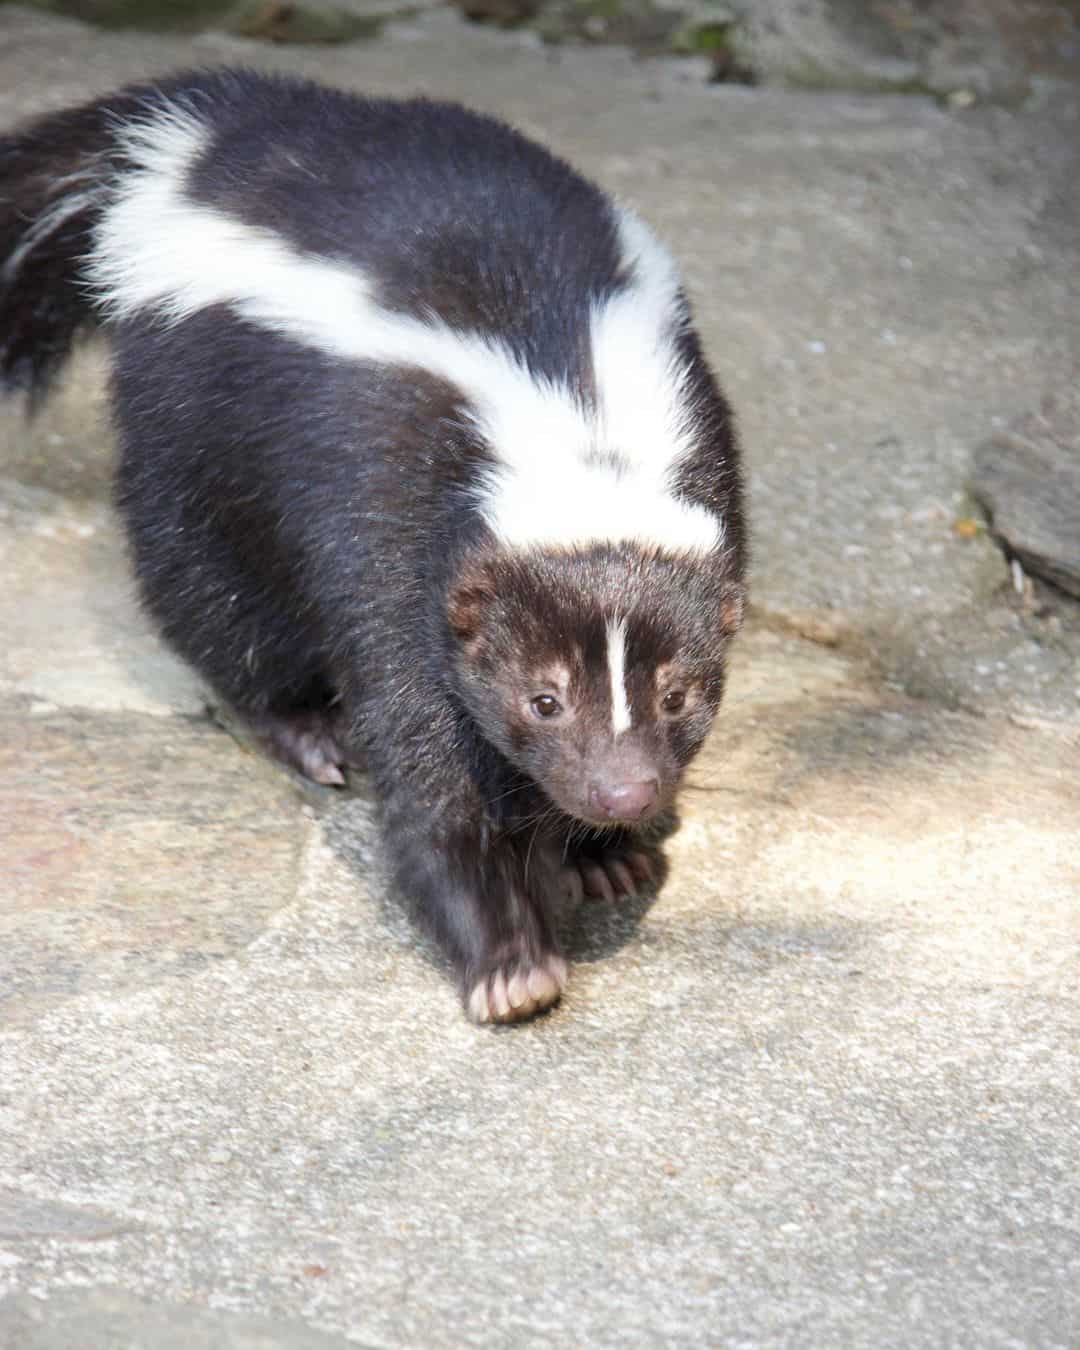 What Sounds Do Skunks Make When Dealing With Danger?